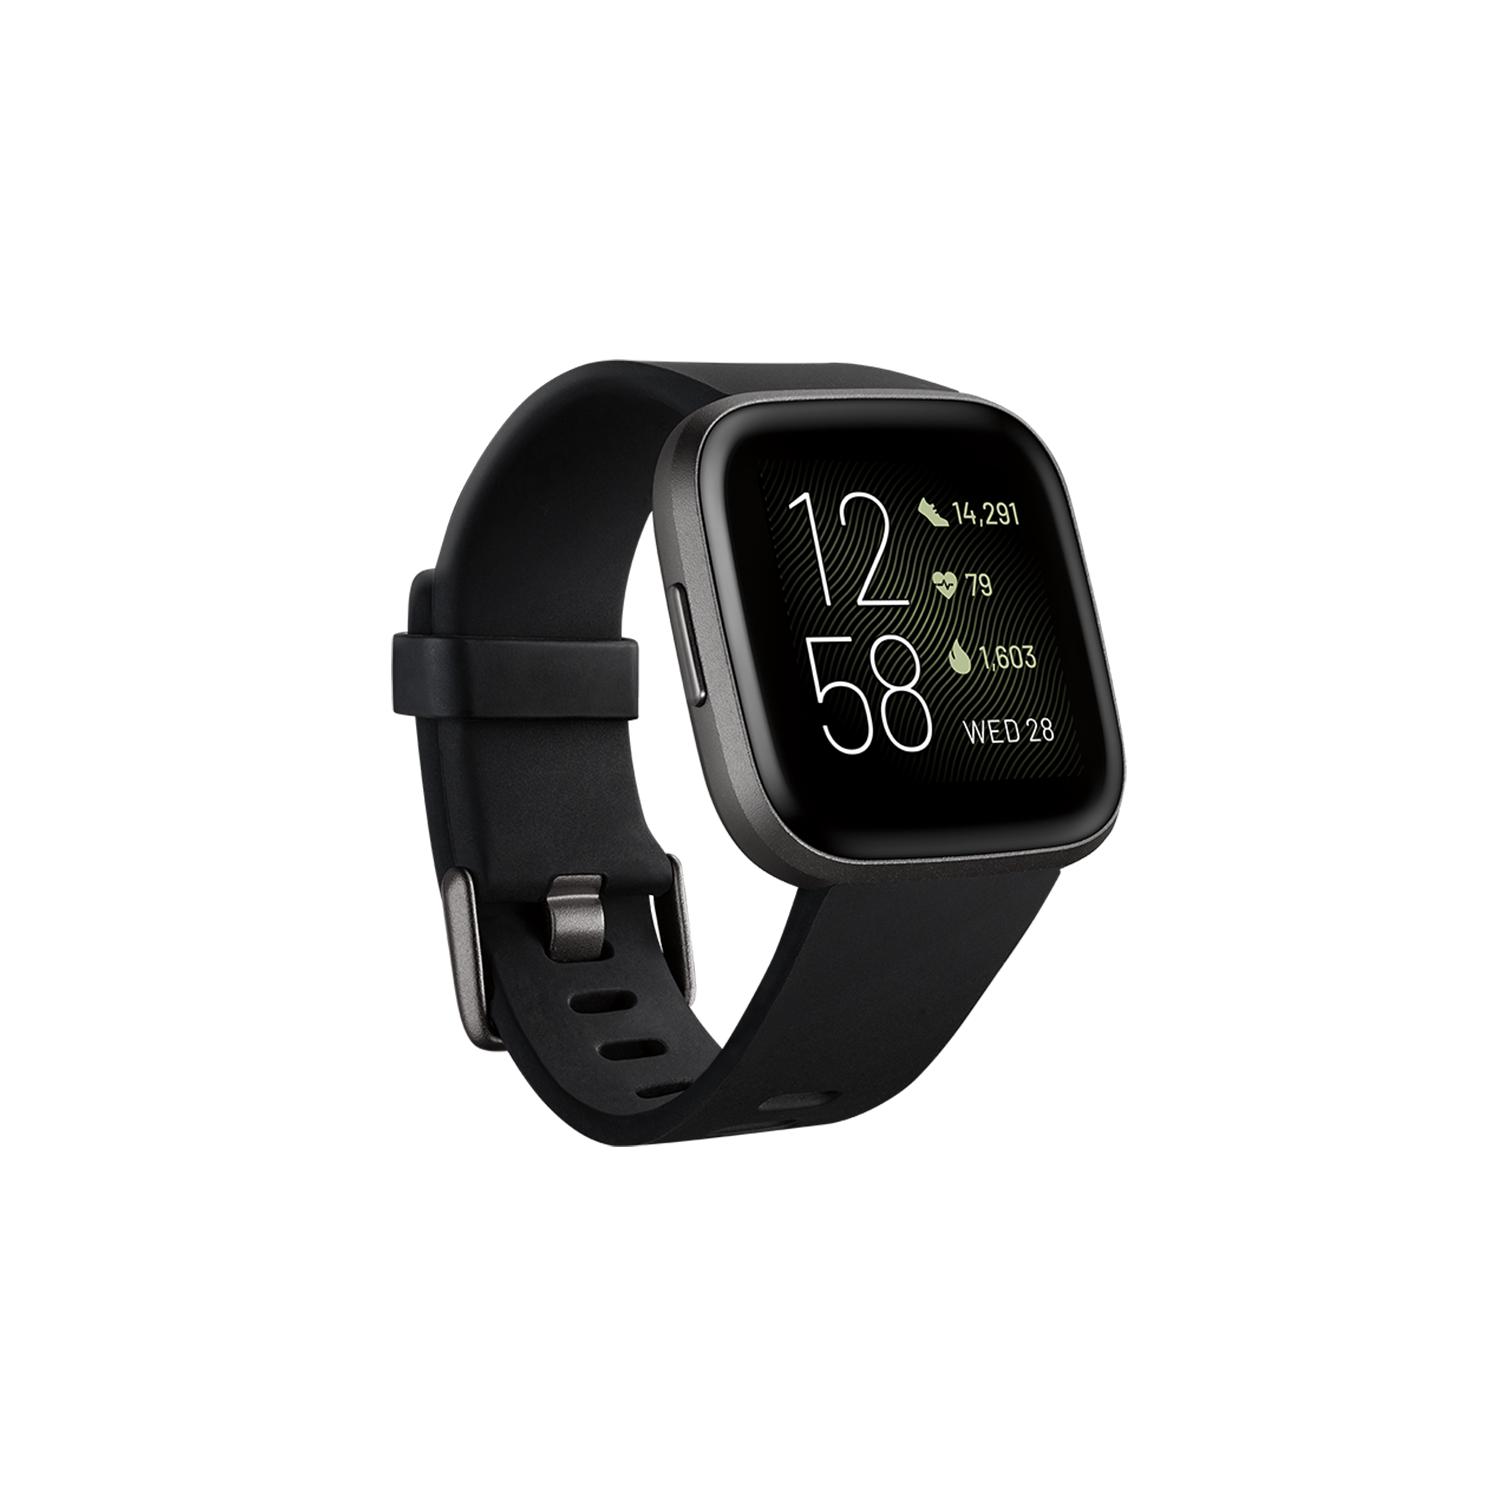 Open Box - Fitbit Versa 2 40mm Smartwatch with Amazon Alexa & Heart Rate Tracking - Black